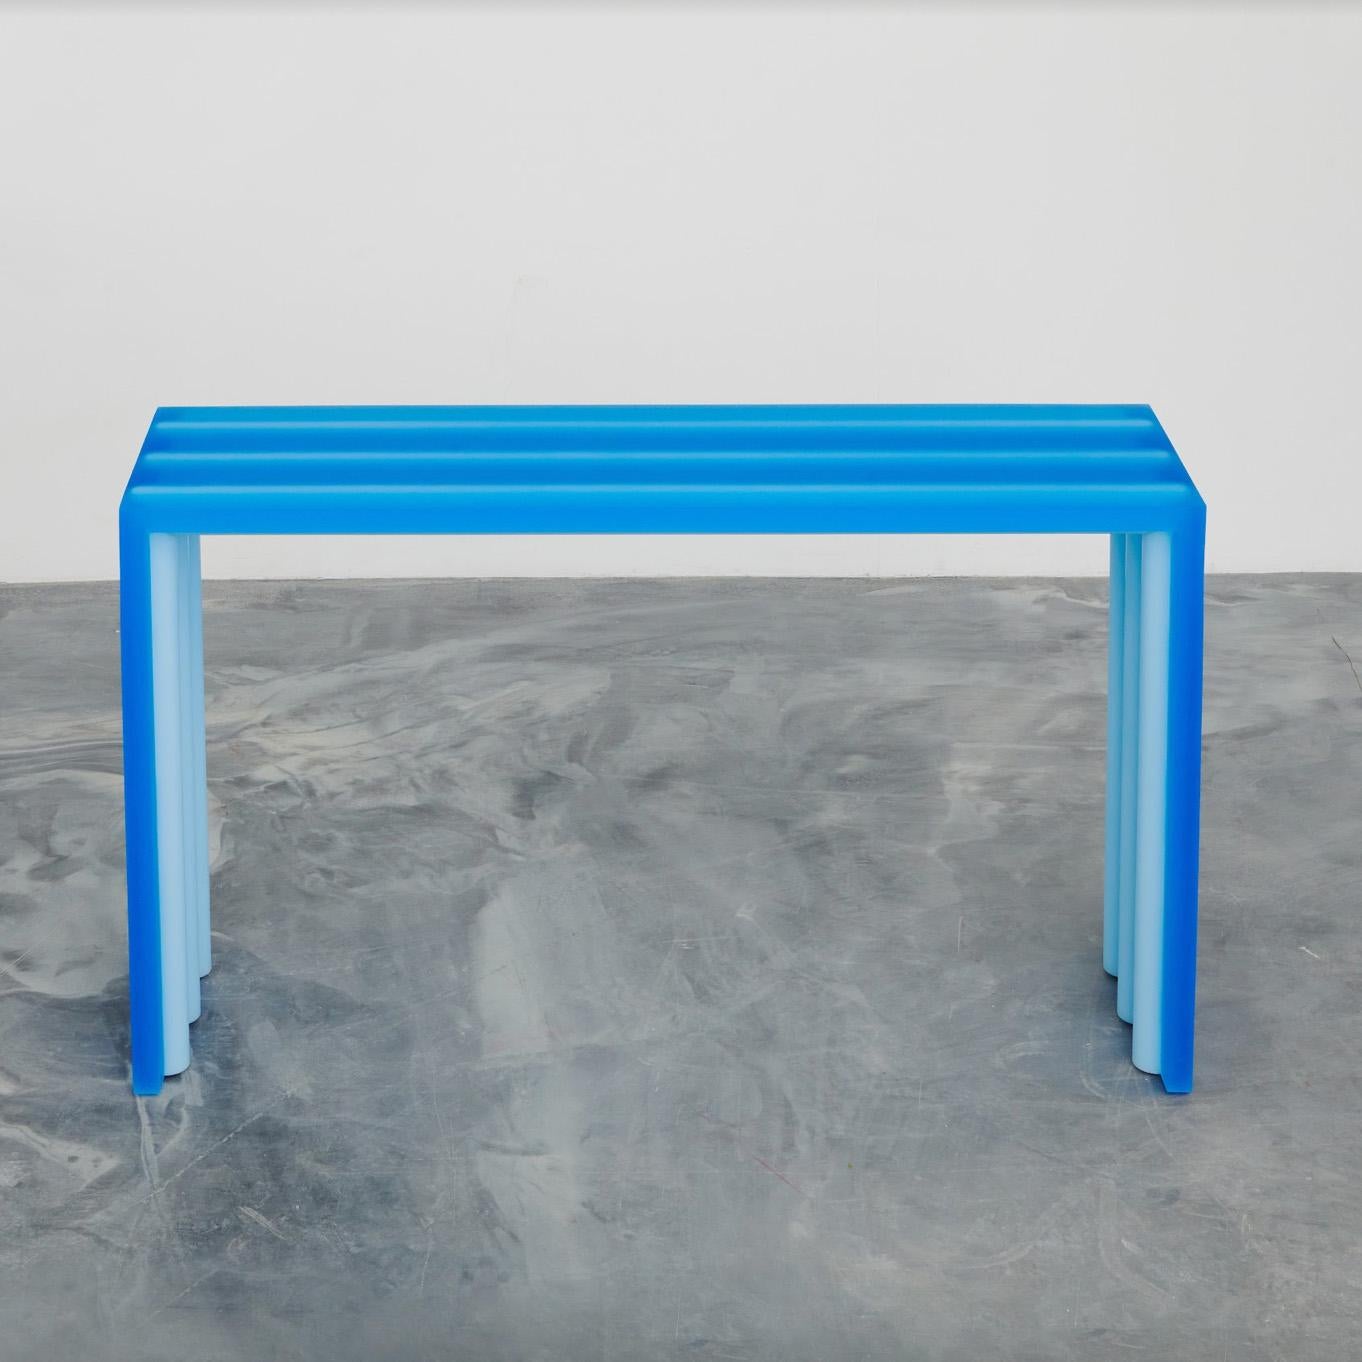 Inspired by the first facture blue console, the tube console has transparent blue resin around a light blue core but in this iteration the core cuts through the resin slab, physically sinking into the transparent outside and pushing through on the